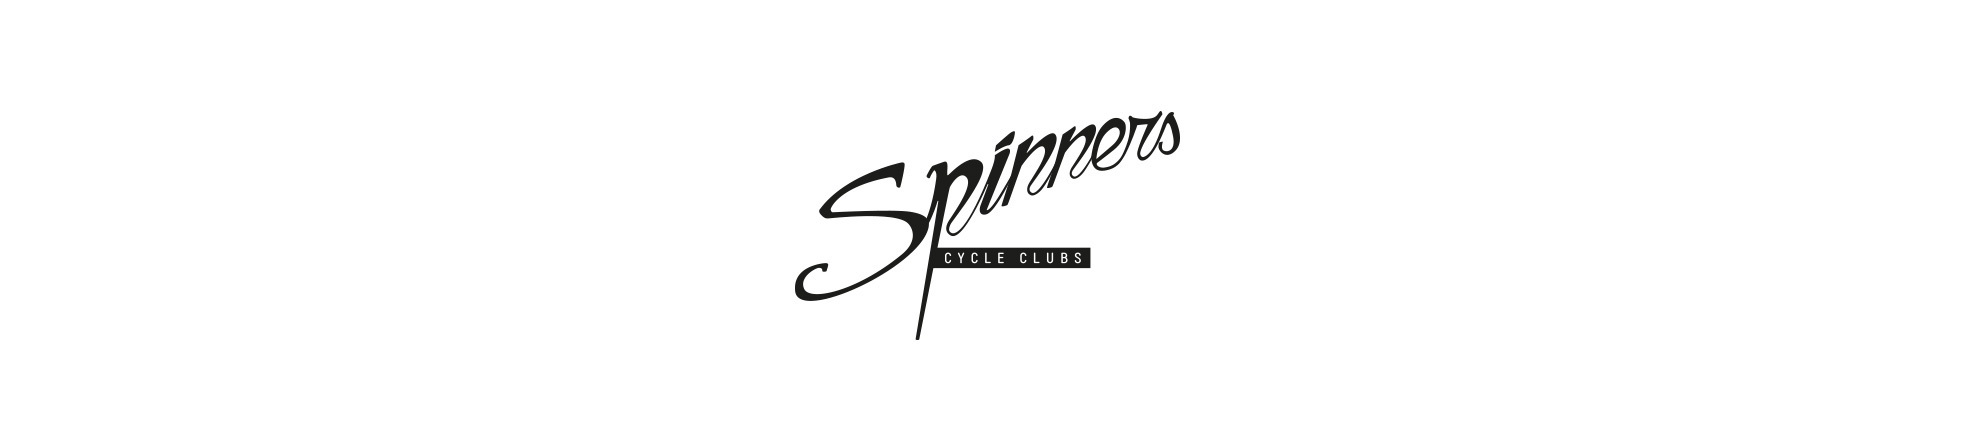 Spinners Project